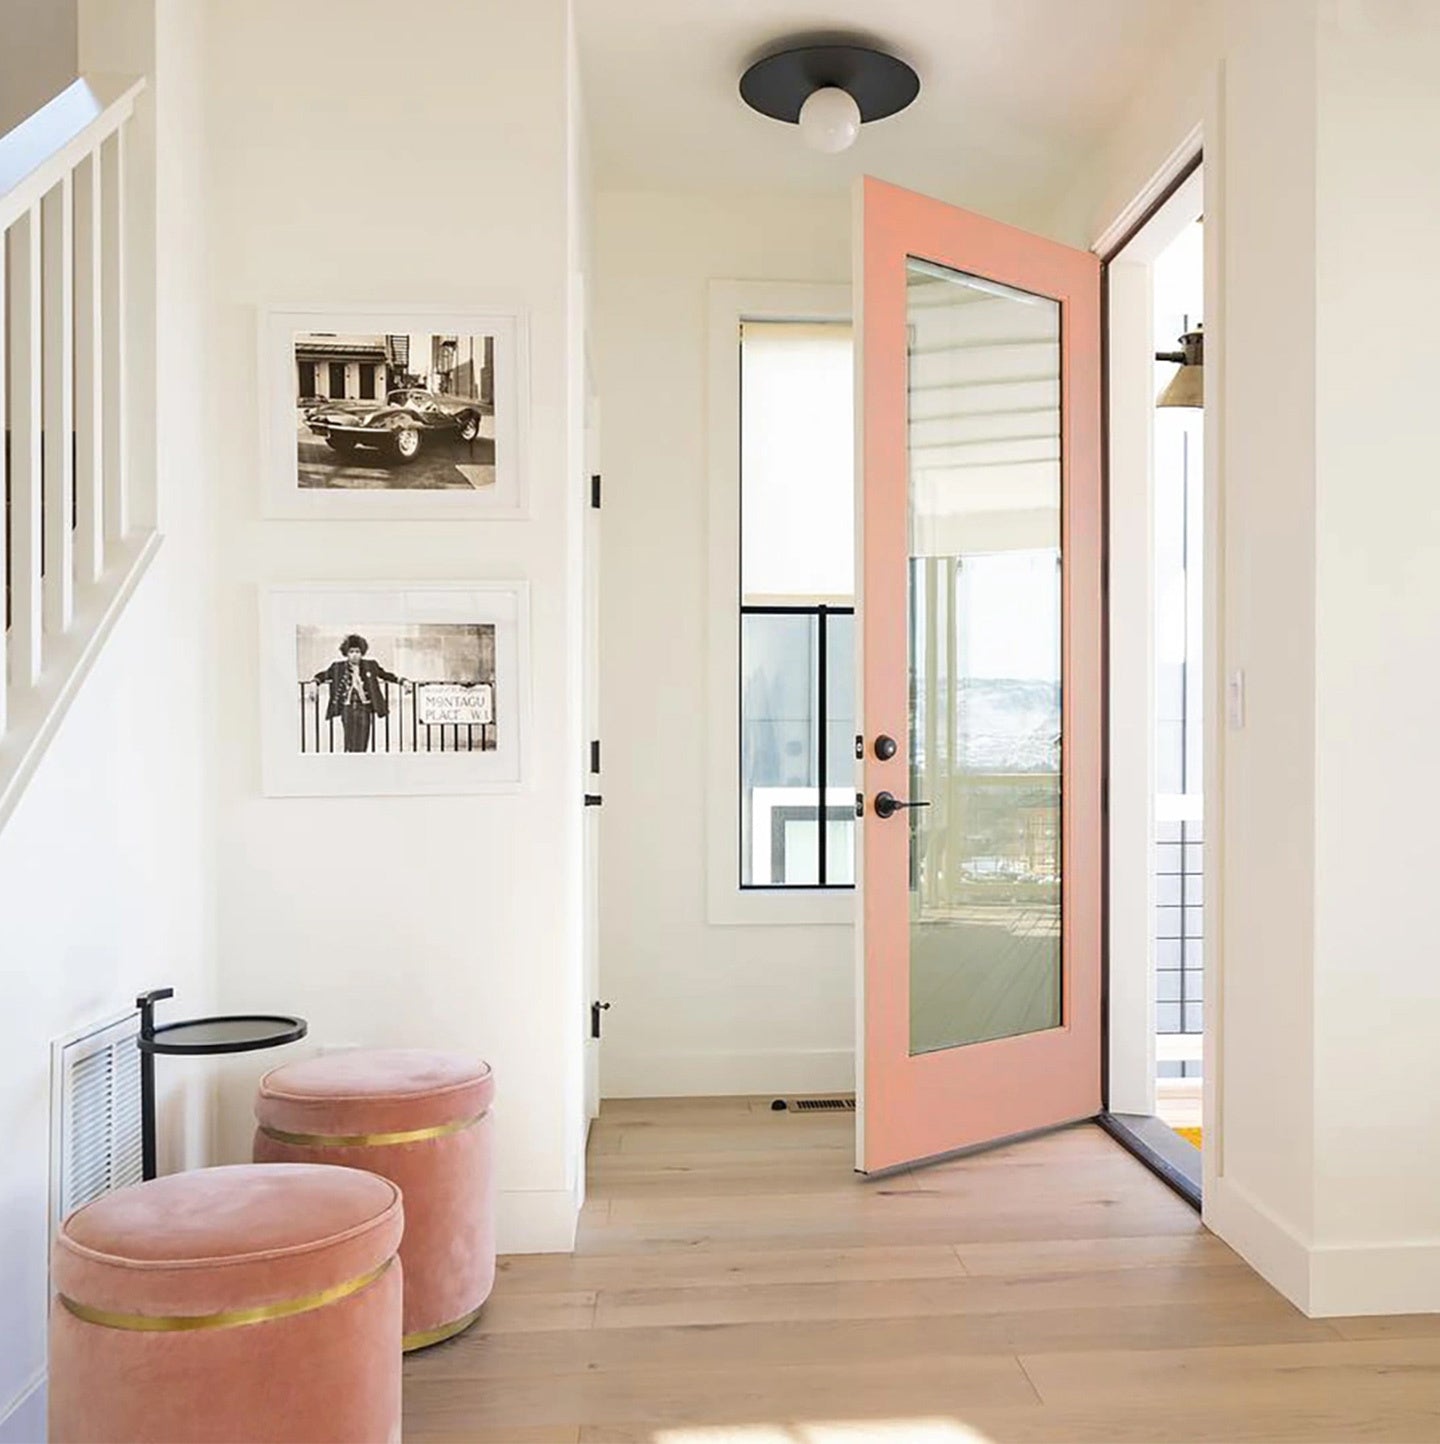 How to Refresh Your Front Door - How to Decorate